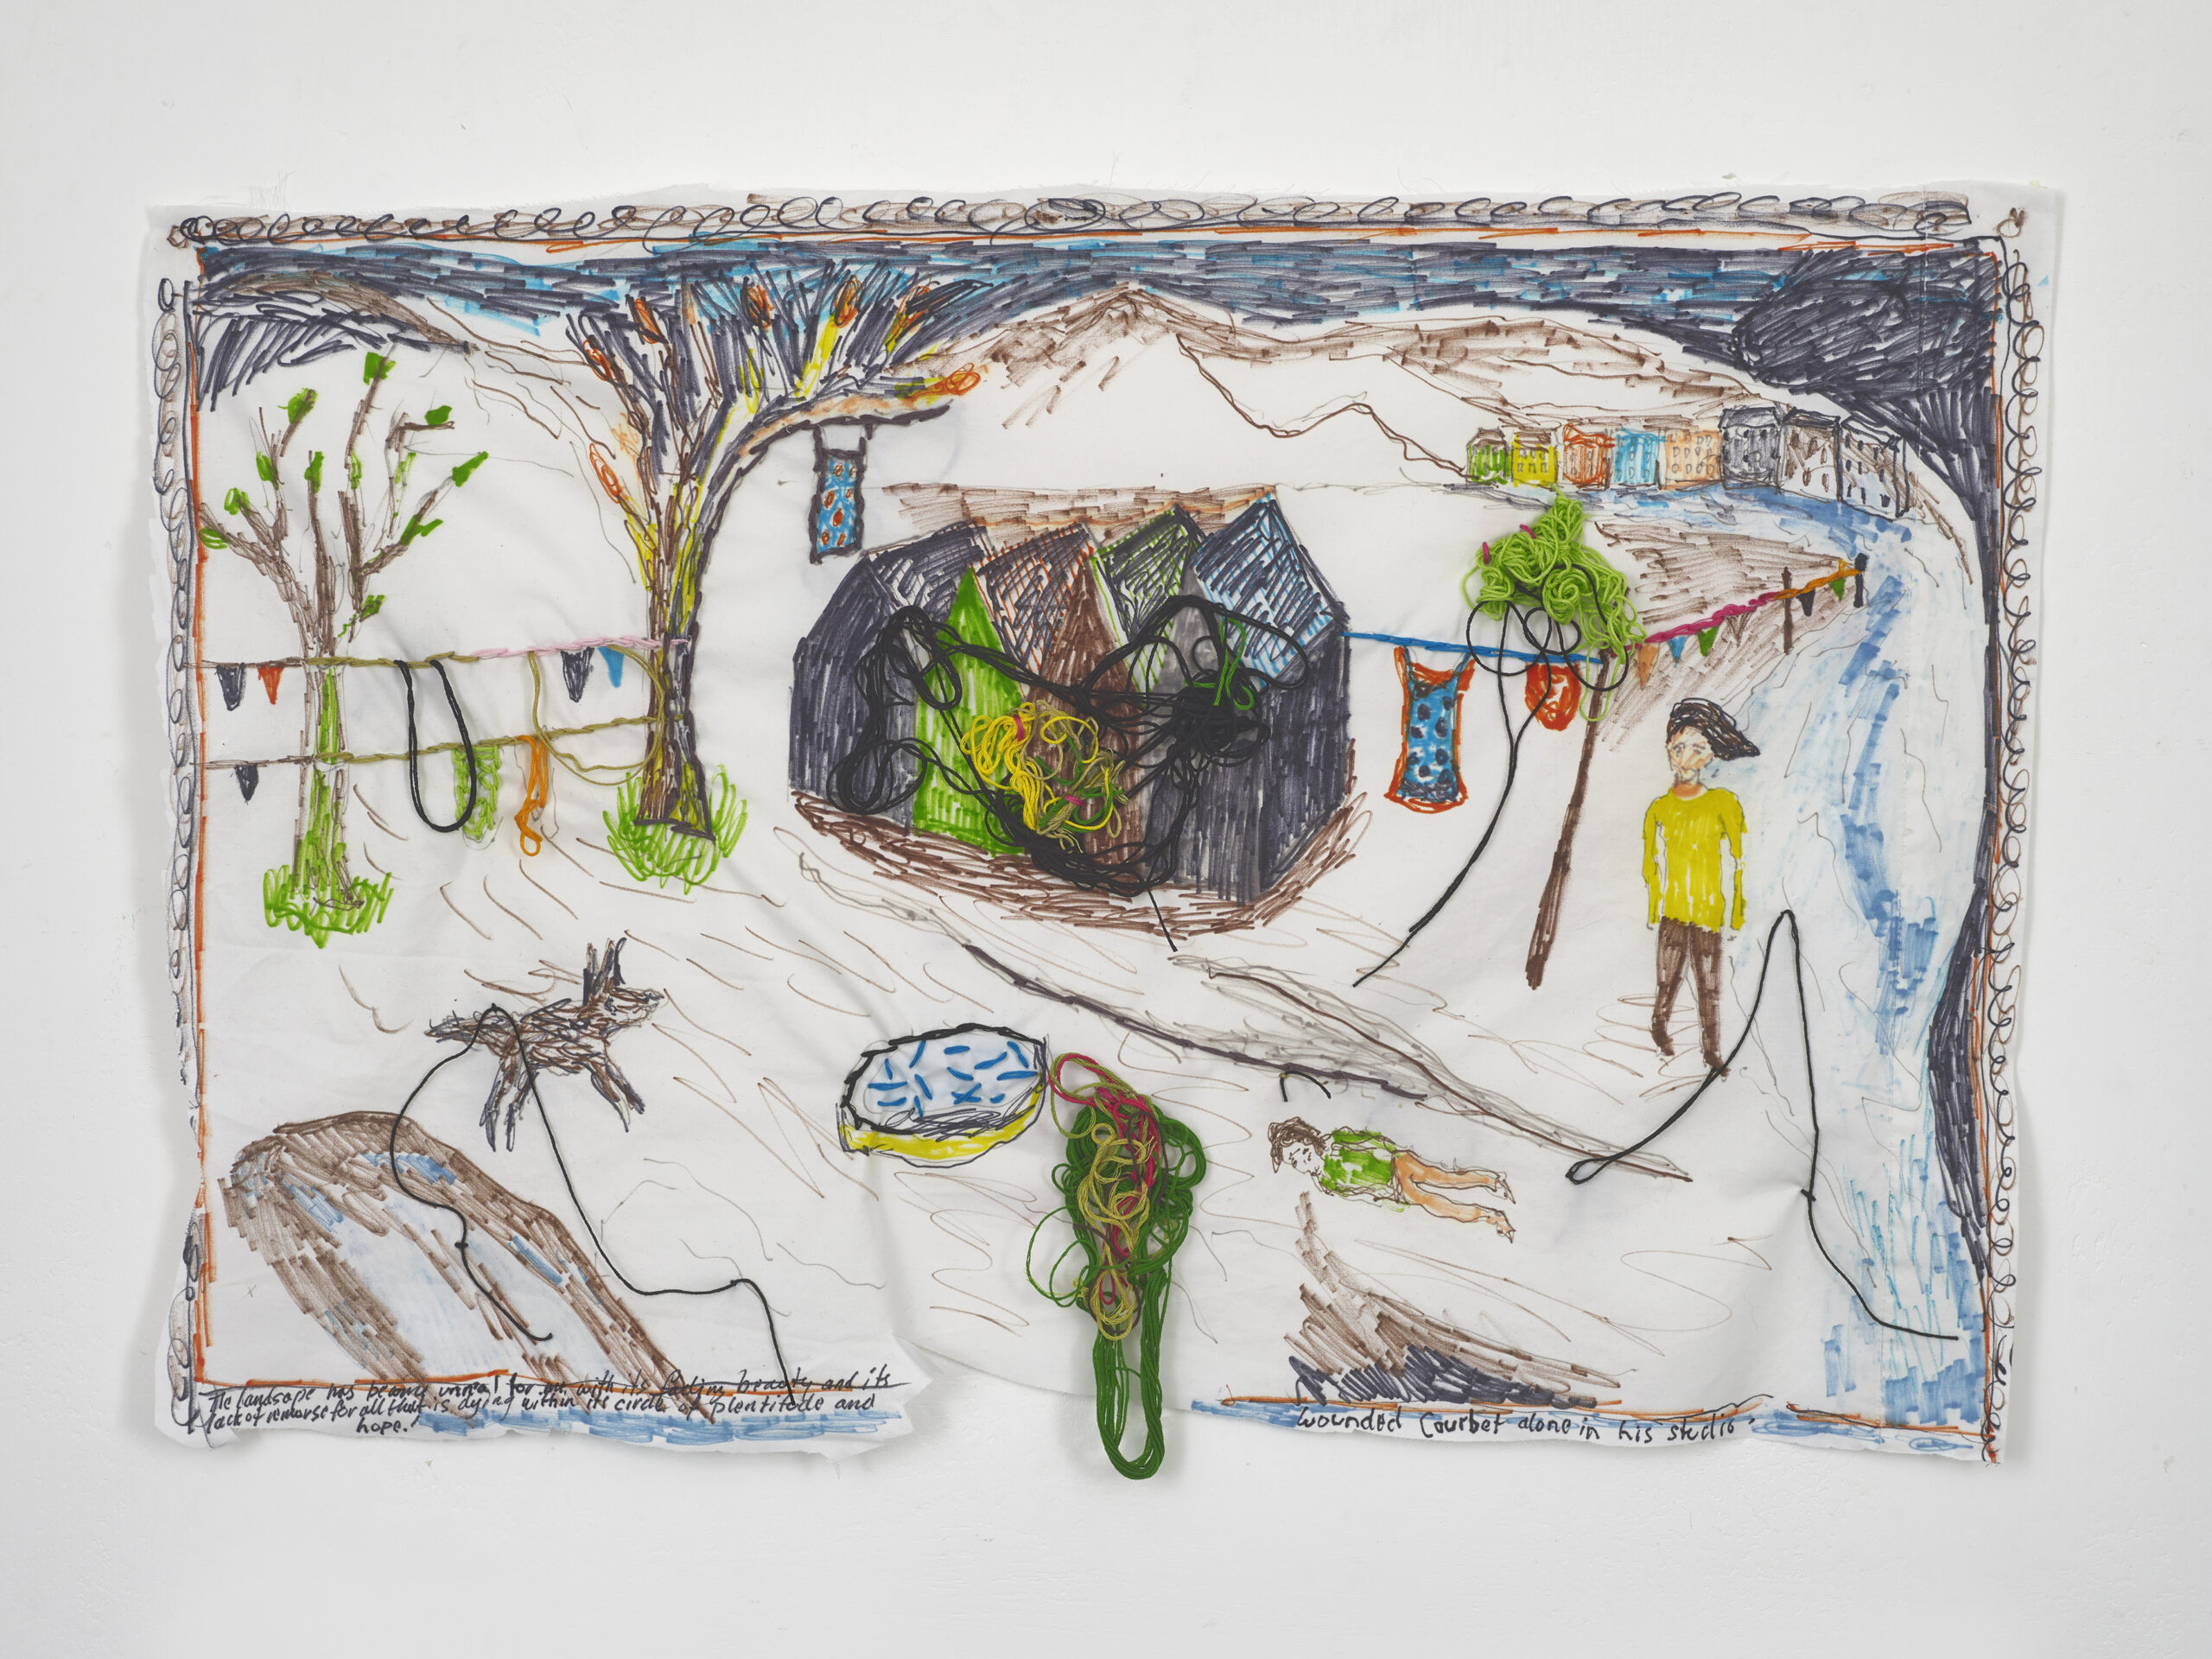 Brian Dawn Chalkley: Wounded Courbet alone in his studio (2020) Pencil, felt tip and thread on cotton pillow case, 75 cm x 45 cm